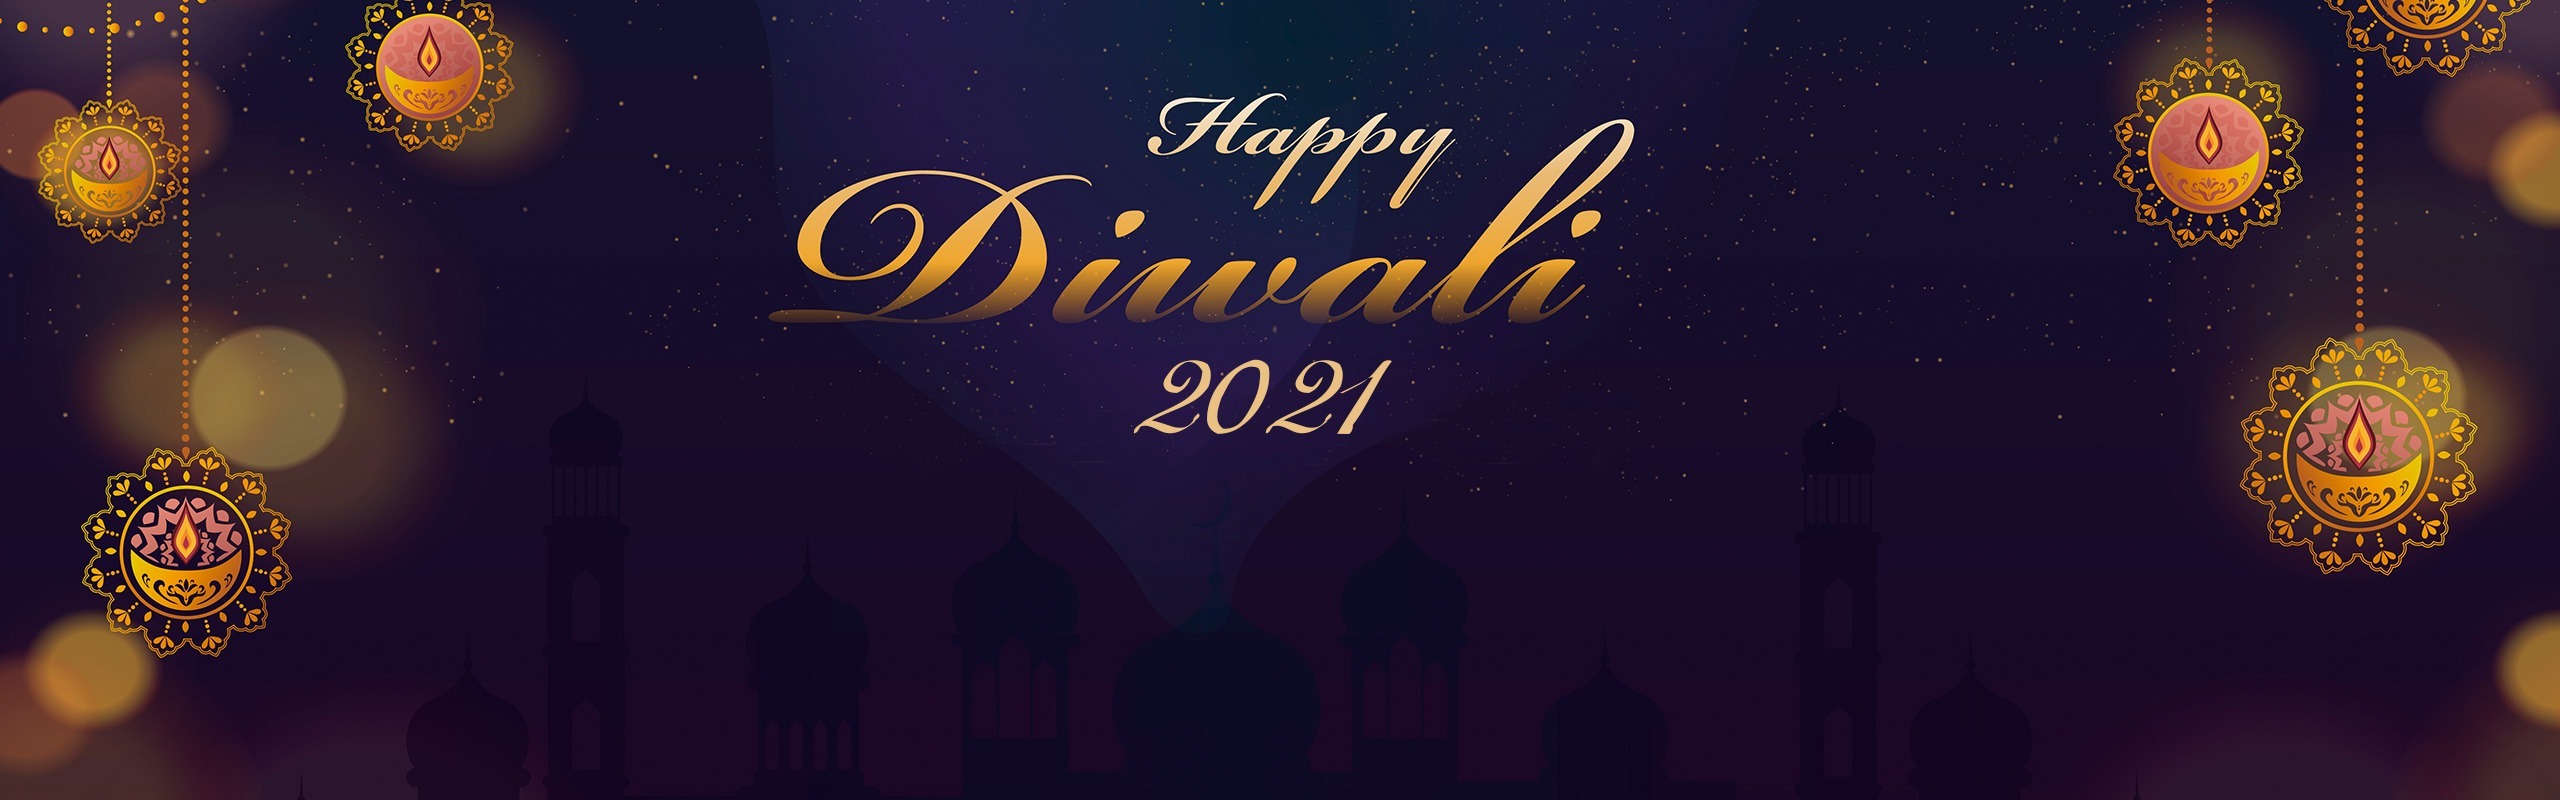 Happy Diwali 2022: Wishes, Greetings and Cards in Hindi, English and Marathi